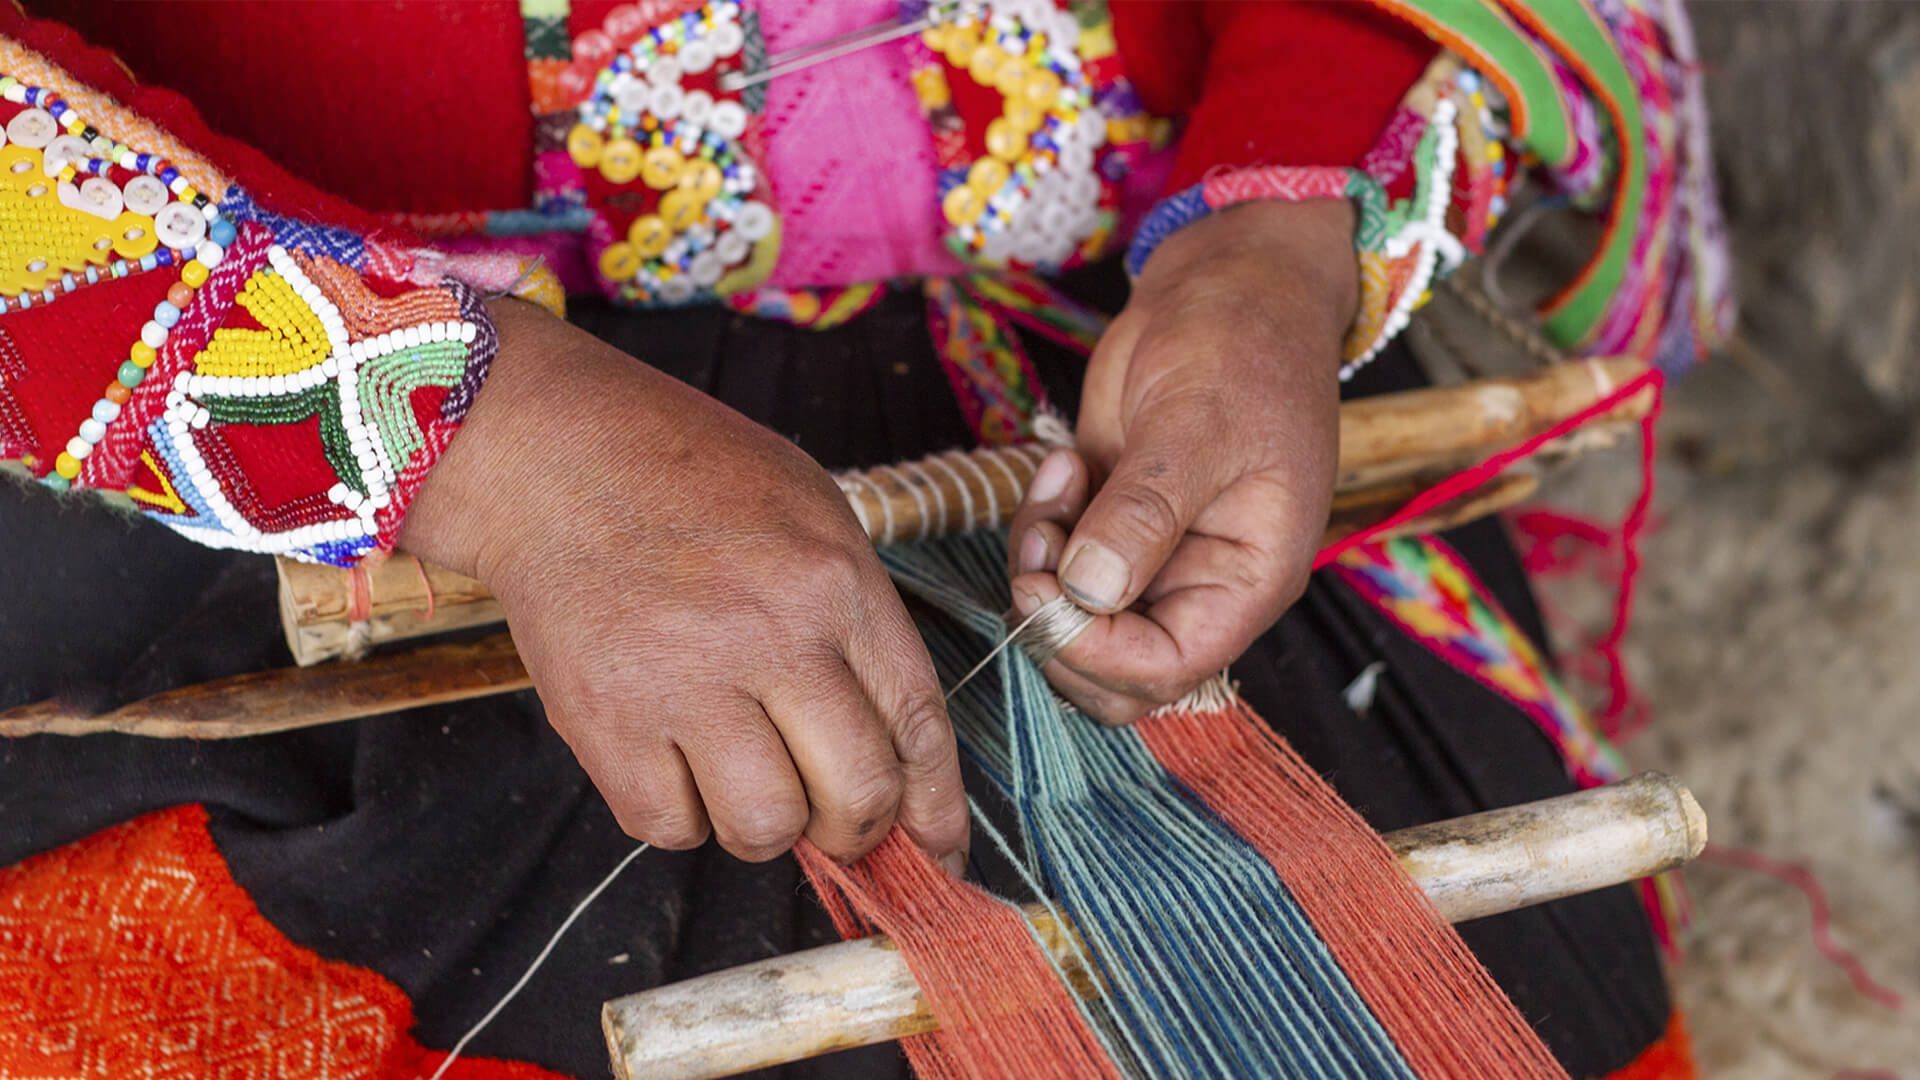 You will participate in washing the alpaca wool, dyeing it with natural products obtained from plants in the area, spinning through the "pushca" or spinning wheel, and using the looms.